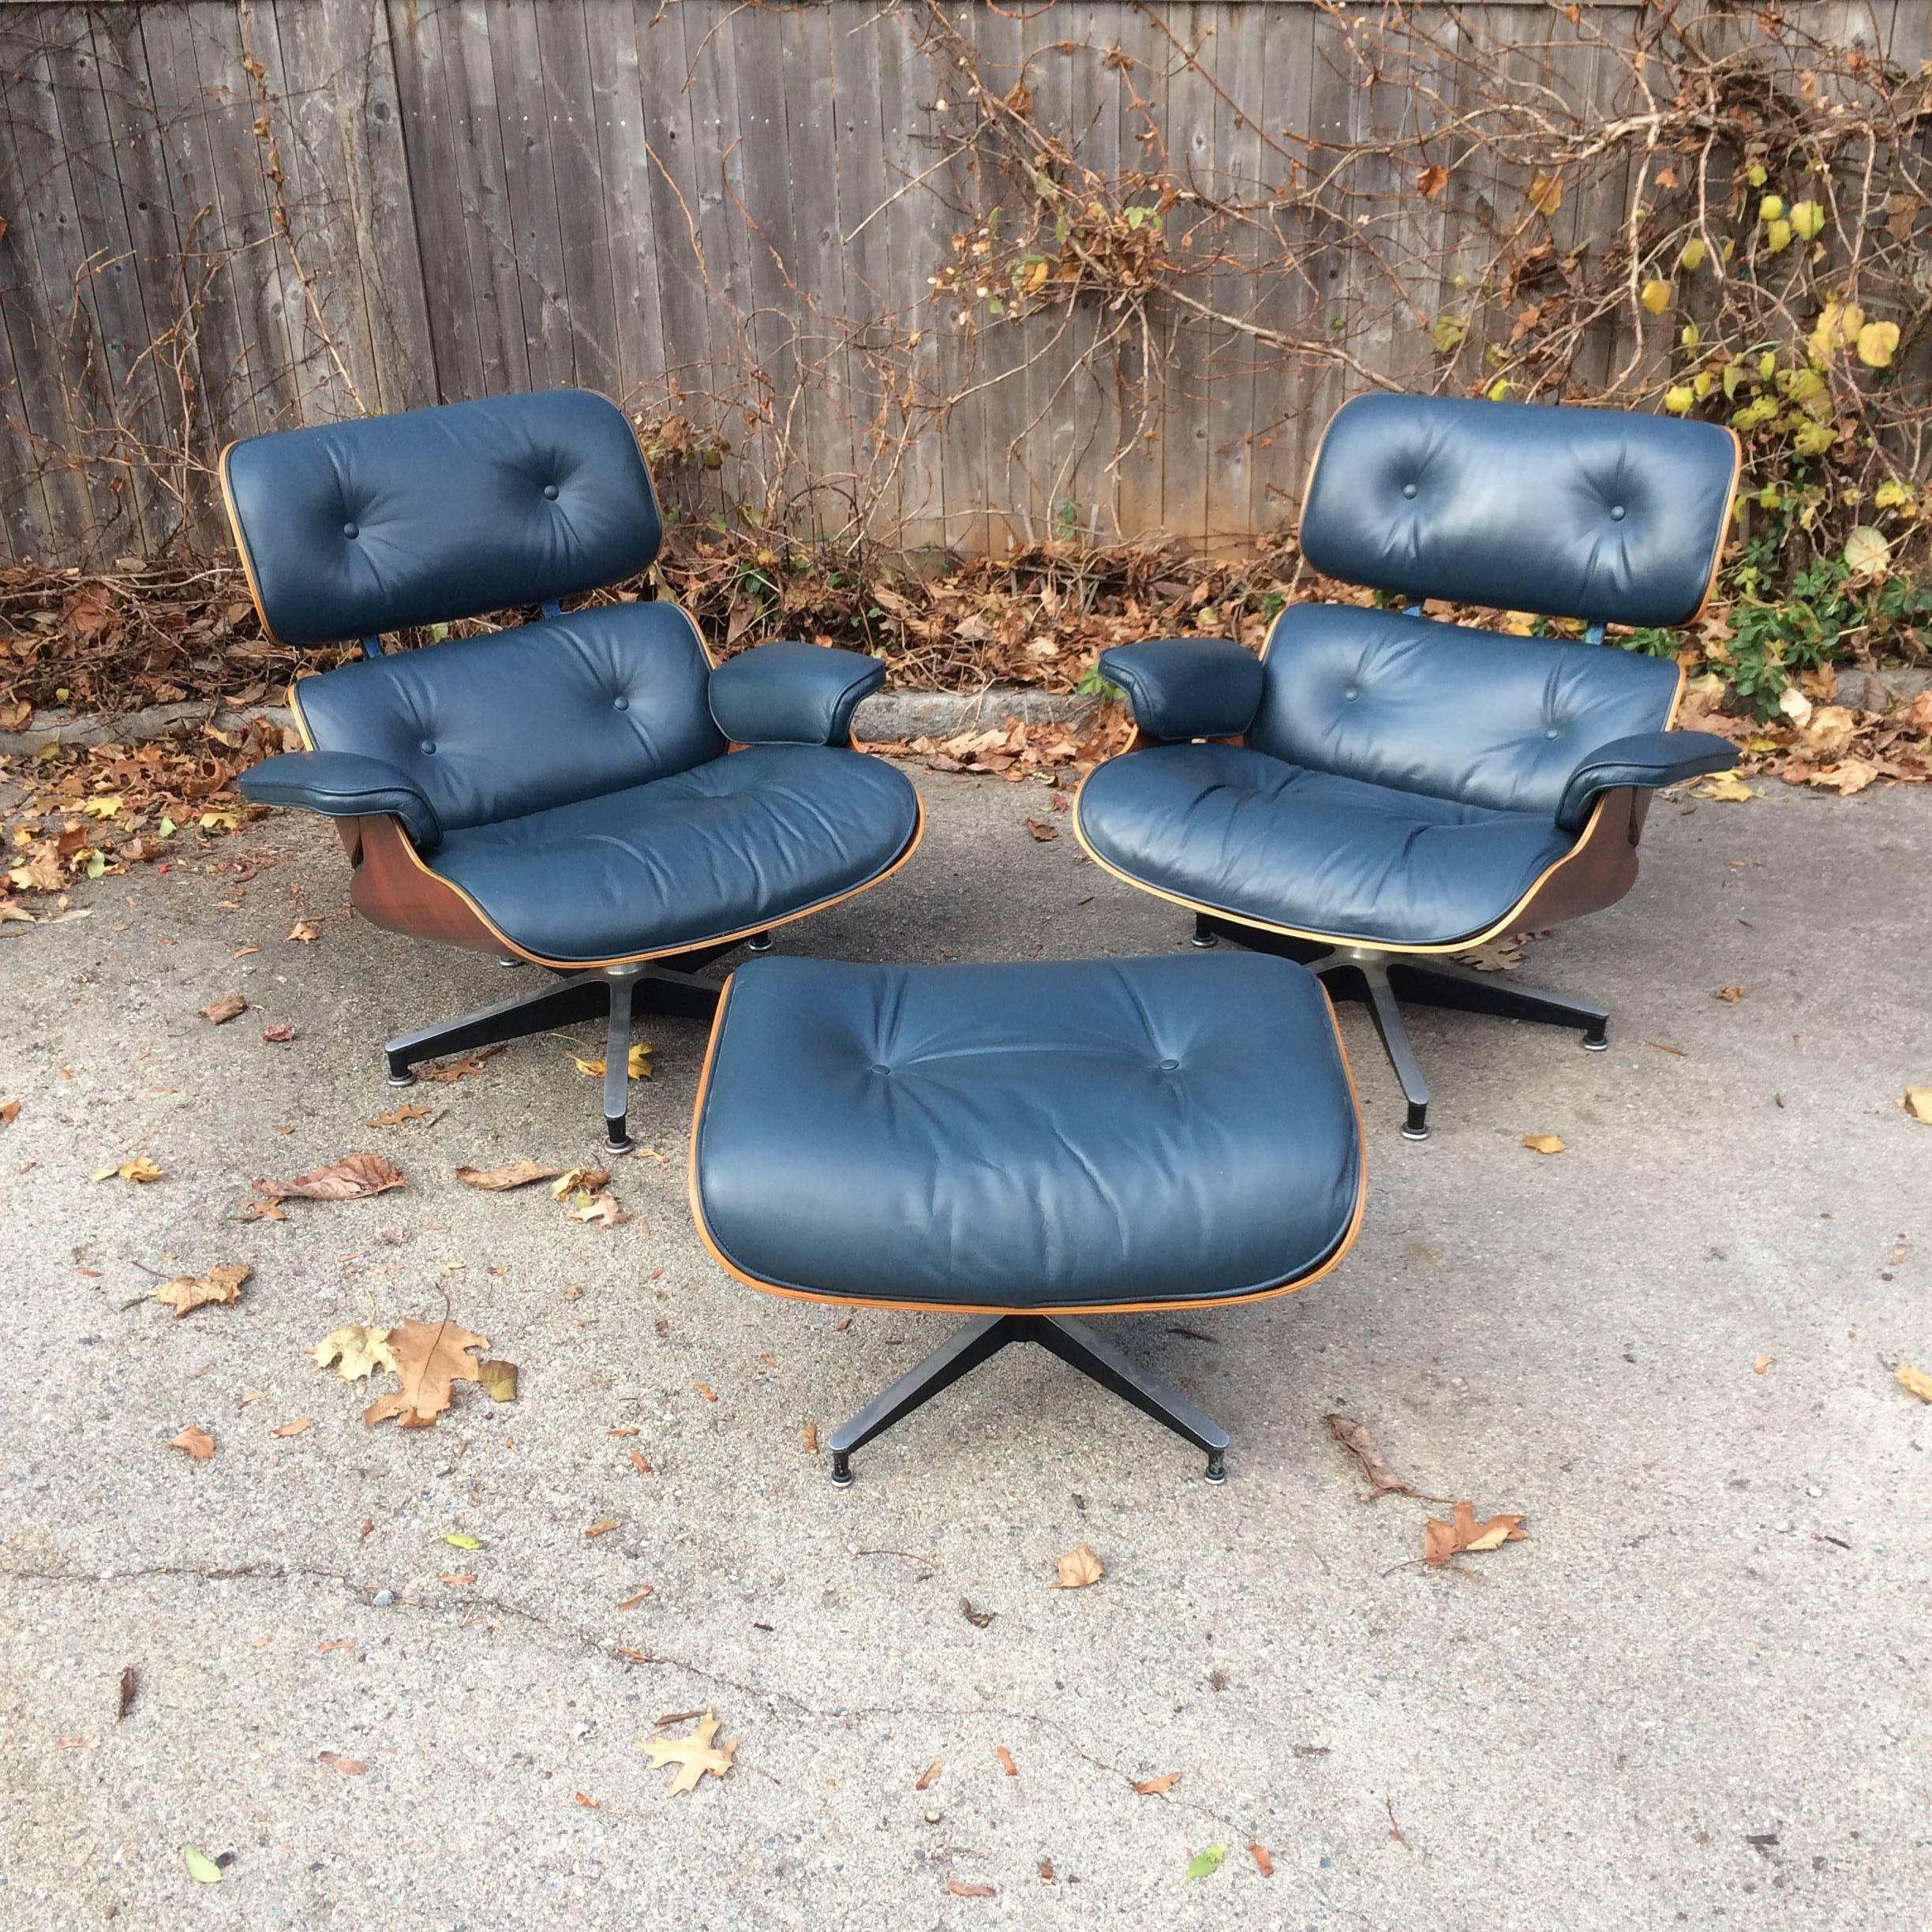 1970s Herman Miller Eames lounge set. Two chairs and one ottoman in custom blue leather and Brazilian rosewood. The shells on the chair have been beautifully restored. The leather is original and perfect. Foam cushions with rectangular clips. Both